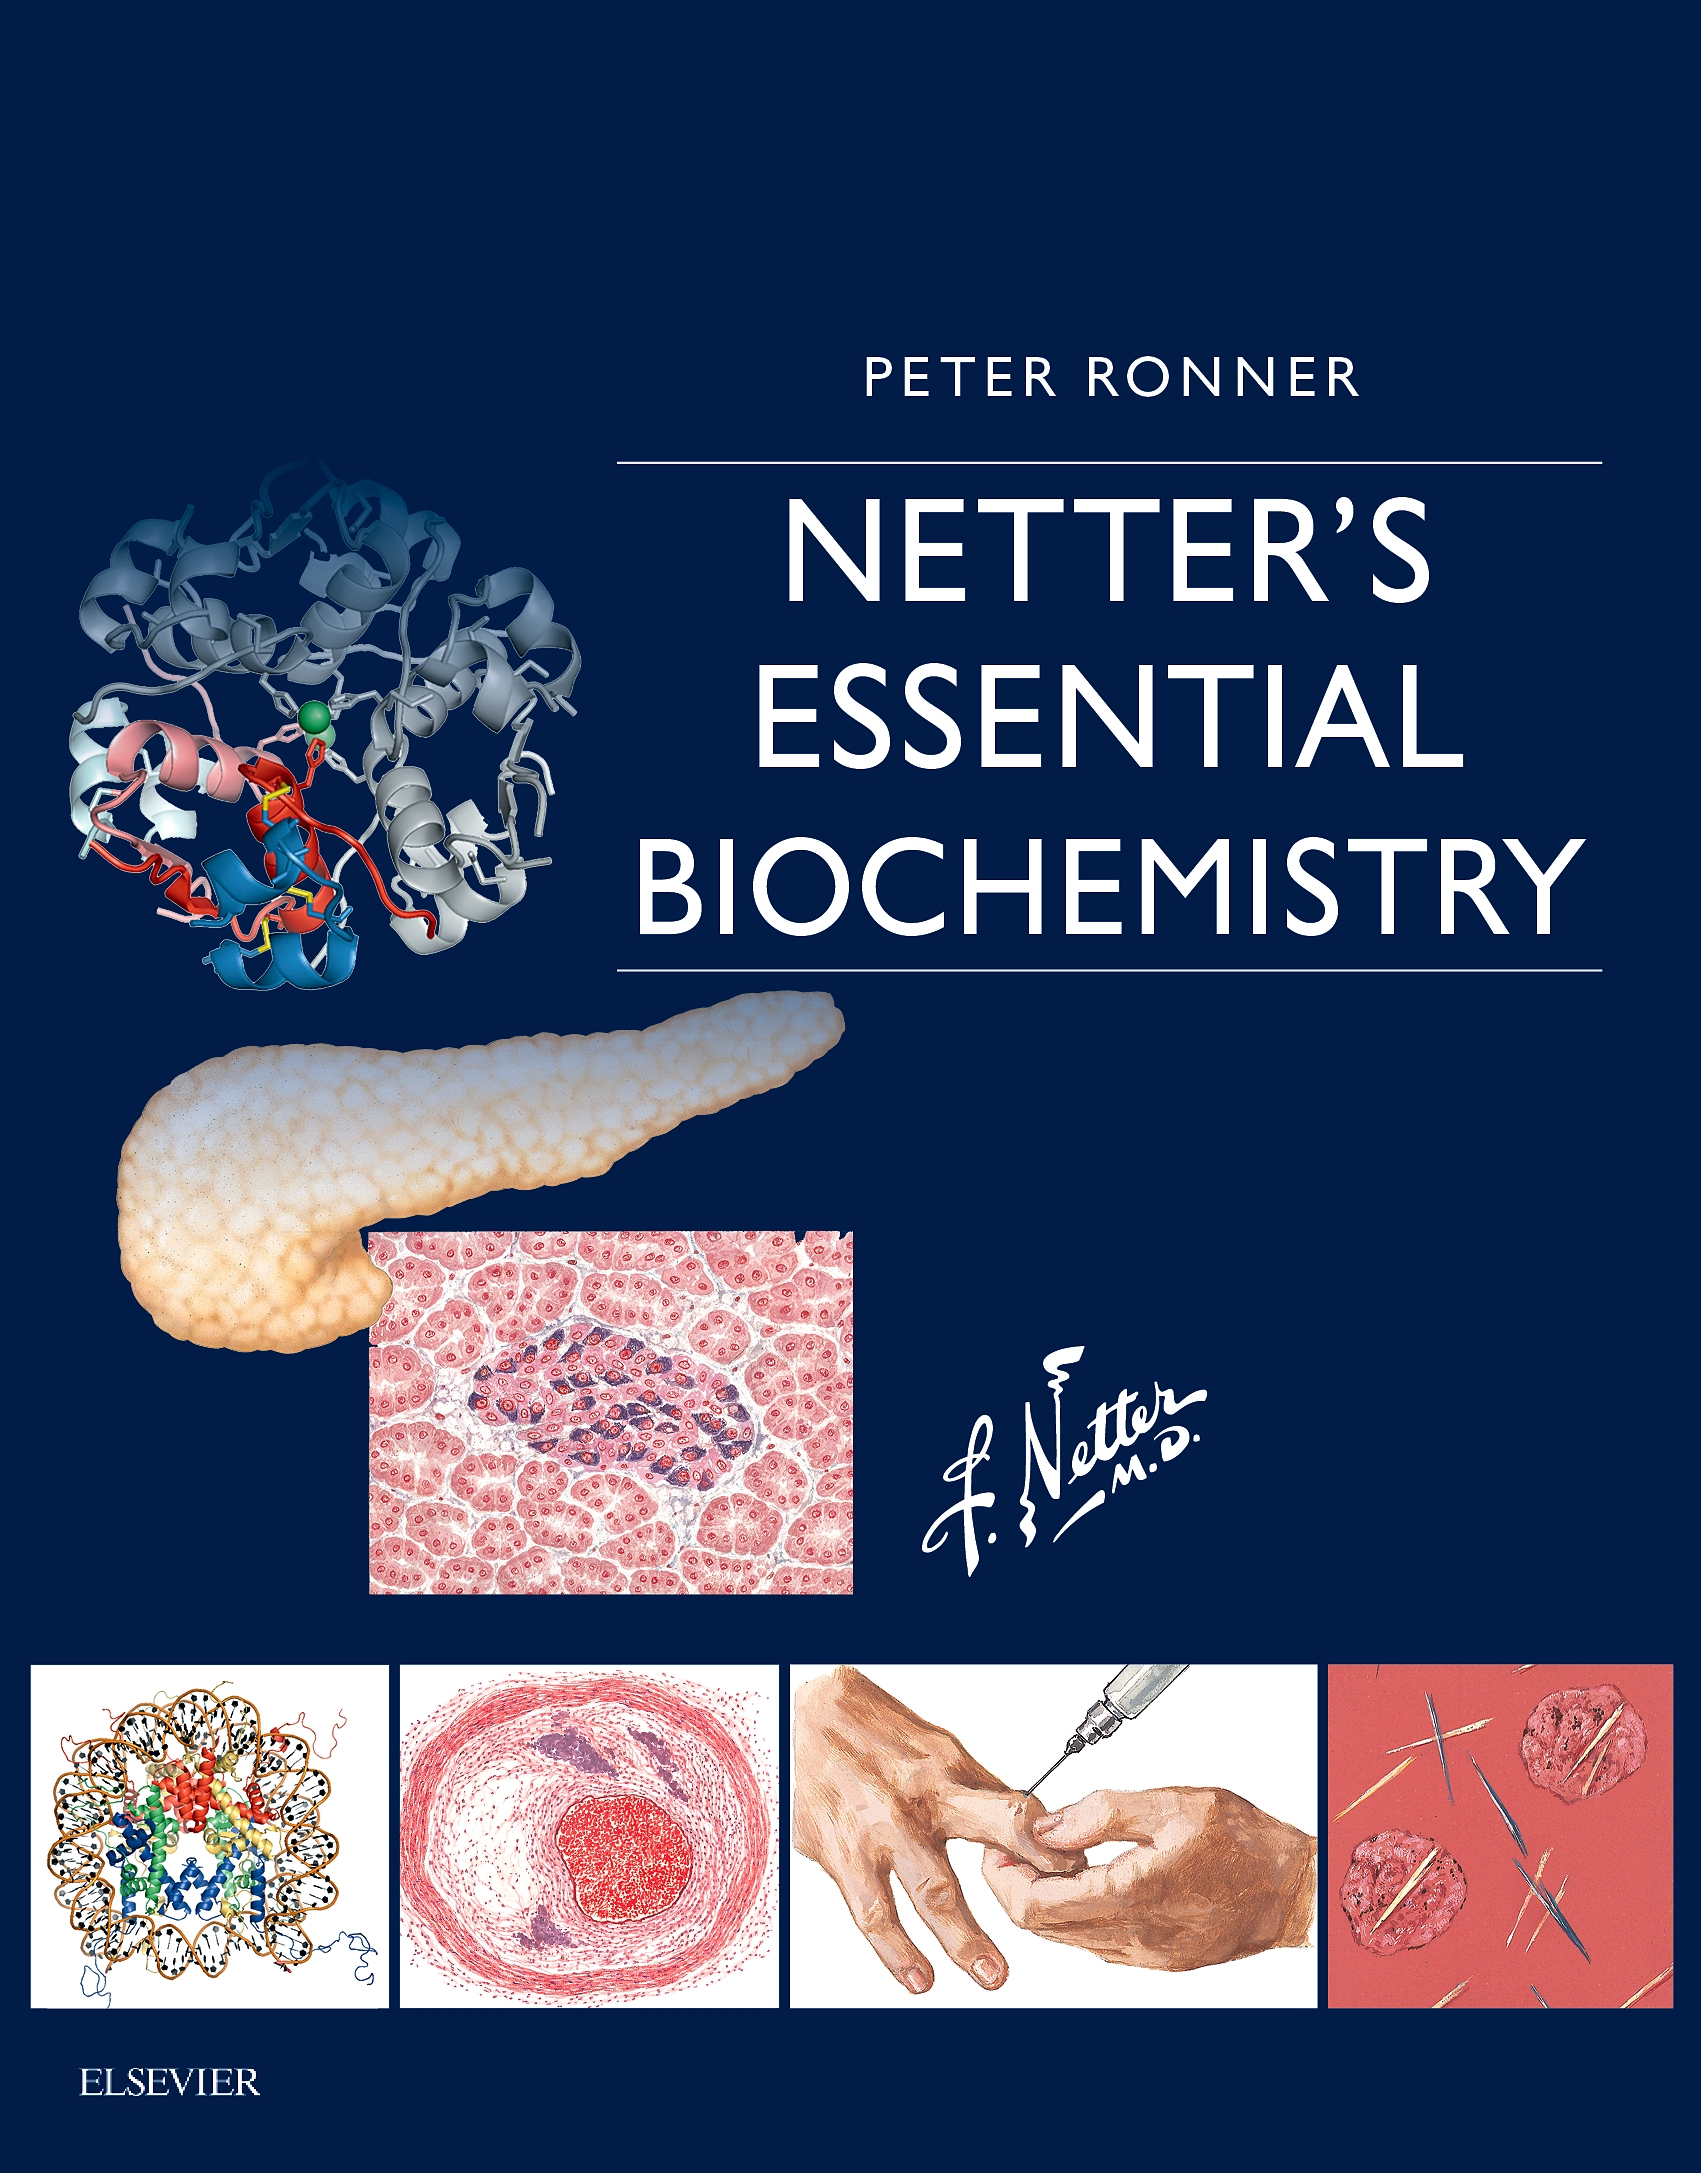 Evolve Resources for Netter's Essential Biochemistry, 1st